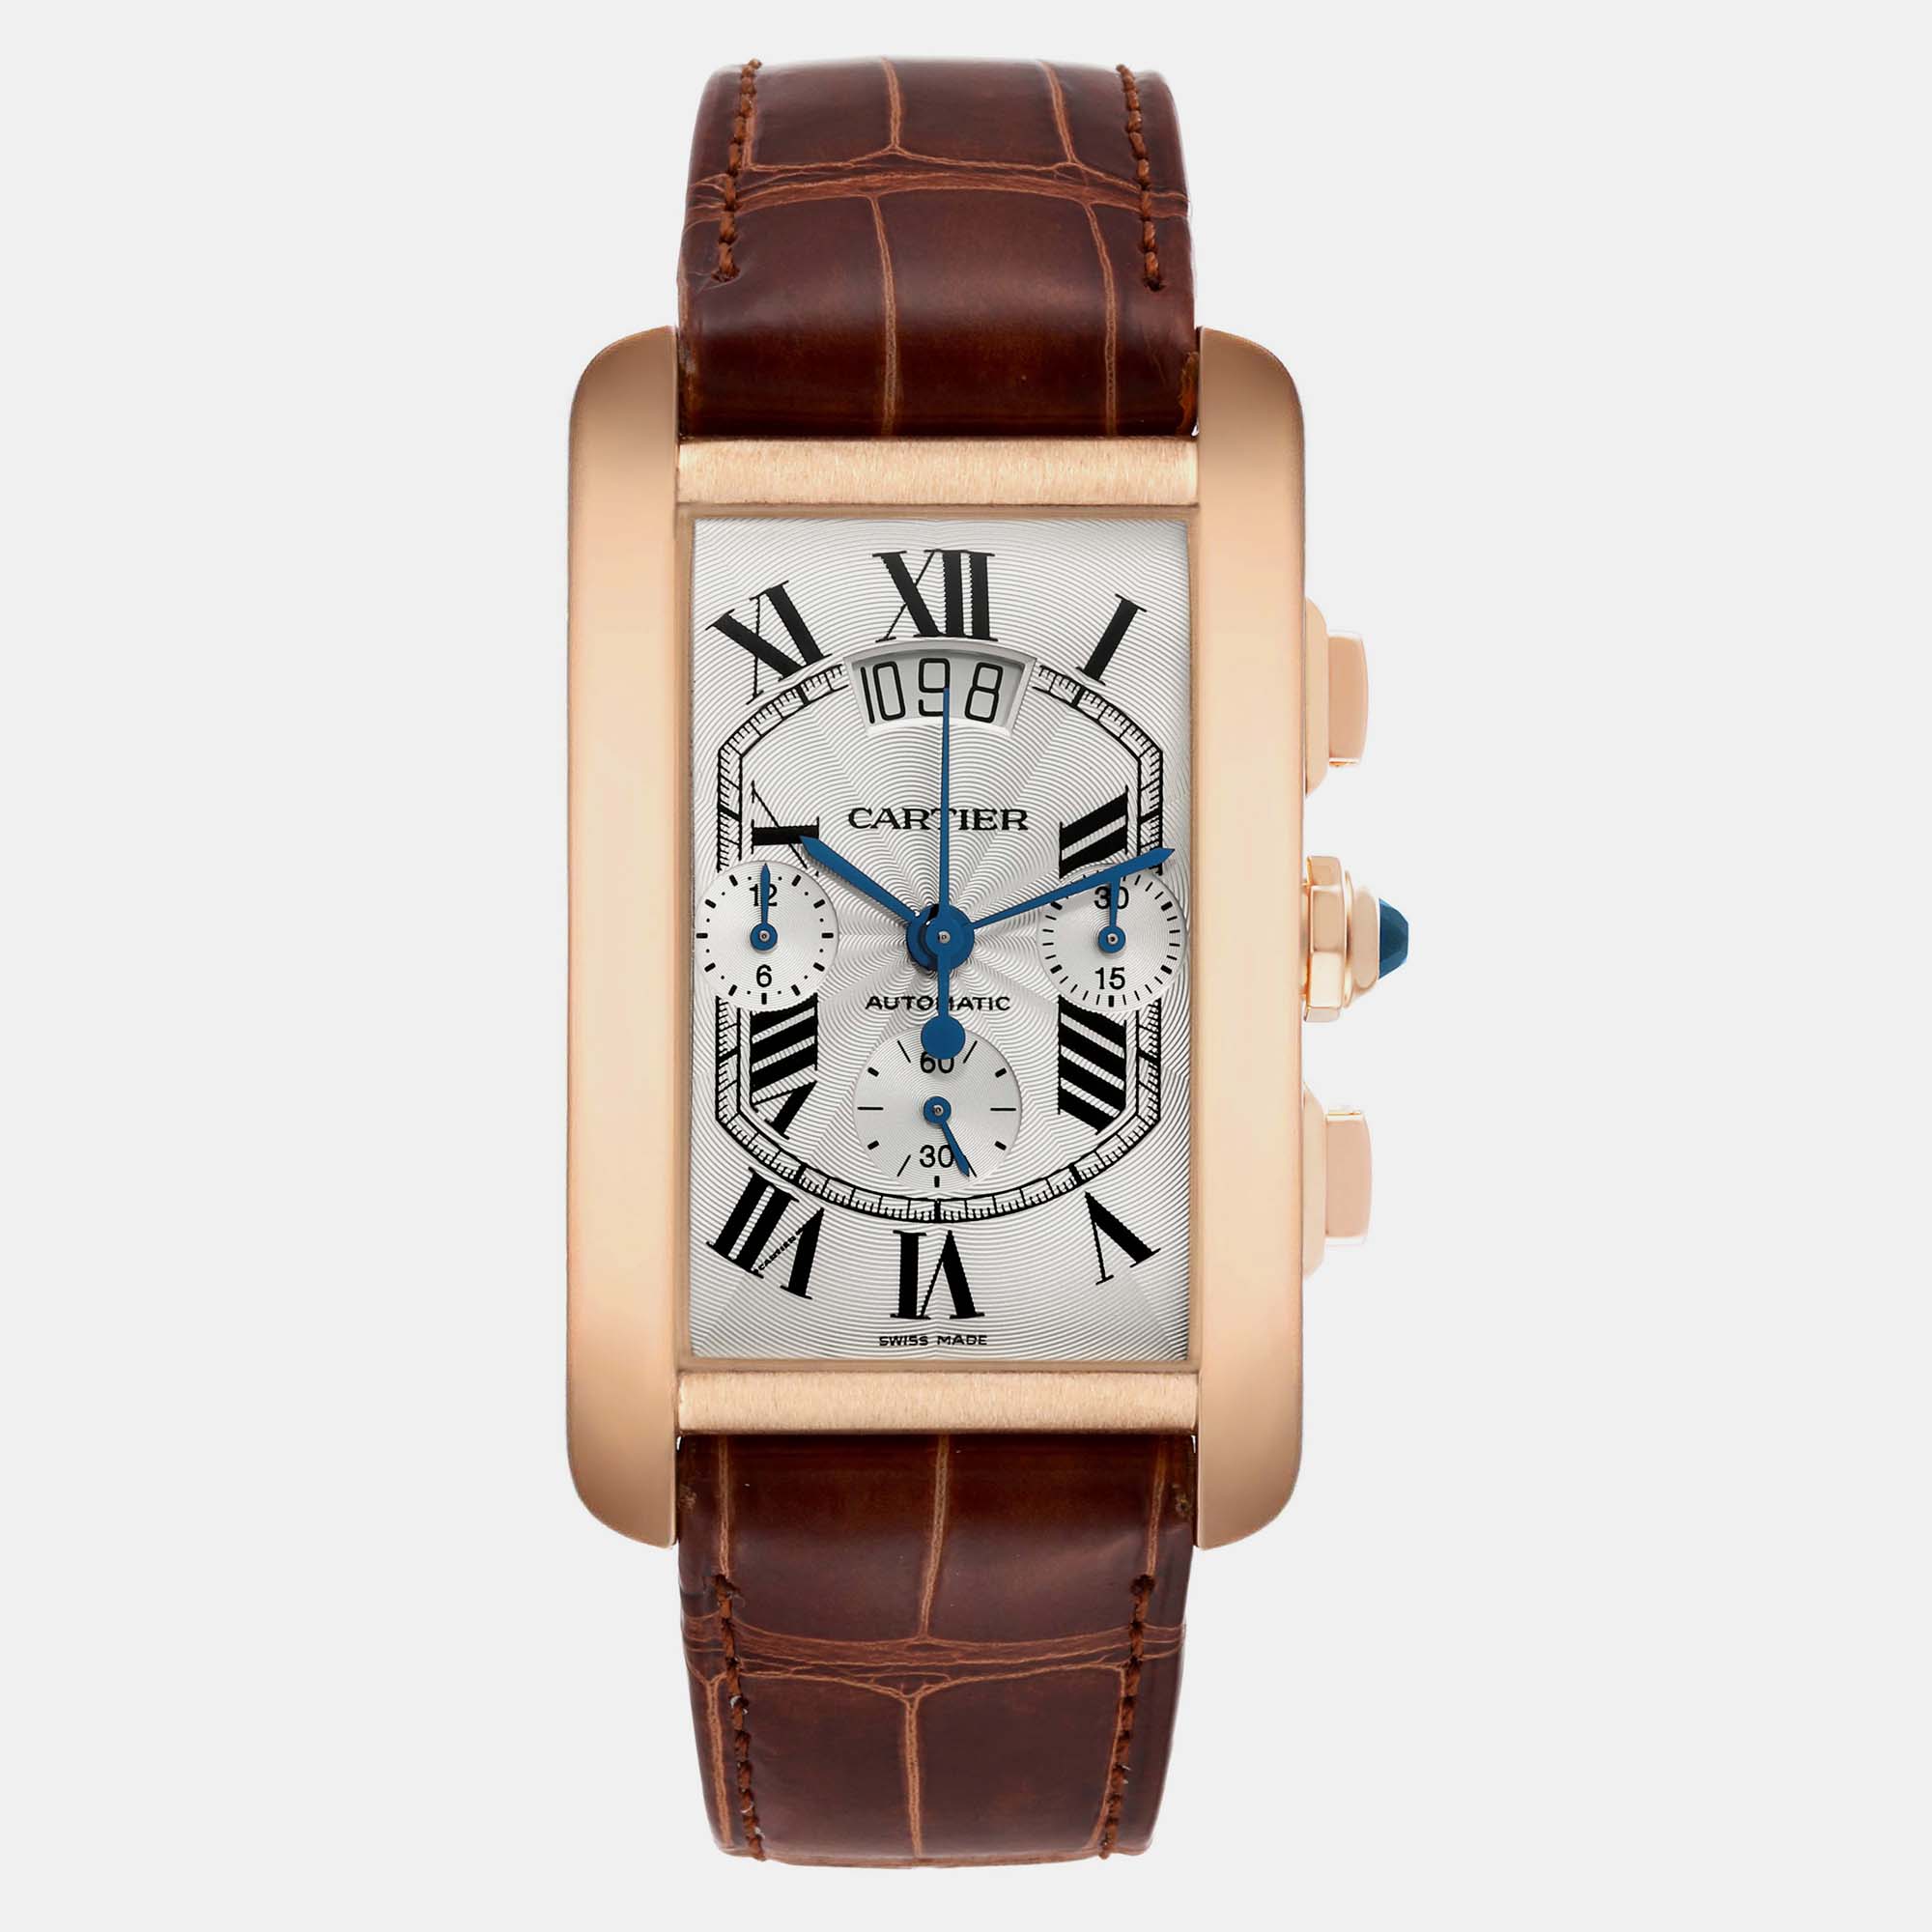 Pre-owned Cartier Tank Americaine Xl Chronograph Rose Gold Men's Watch W2610751 52 X 31.1 Mm In Silver